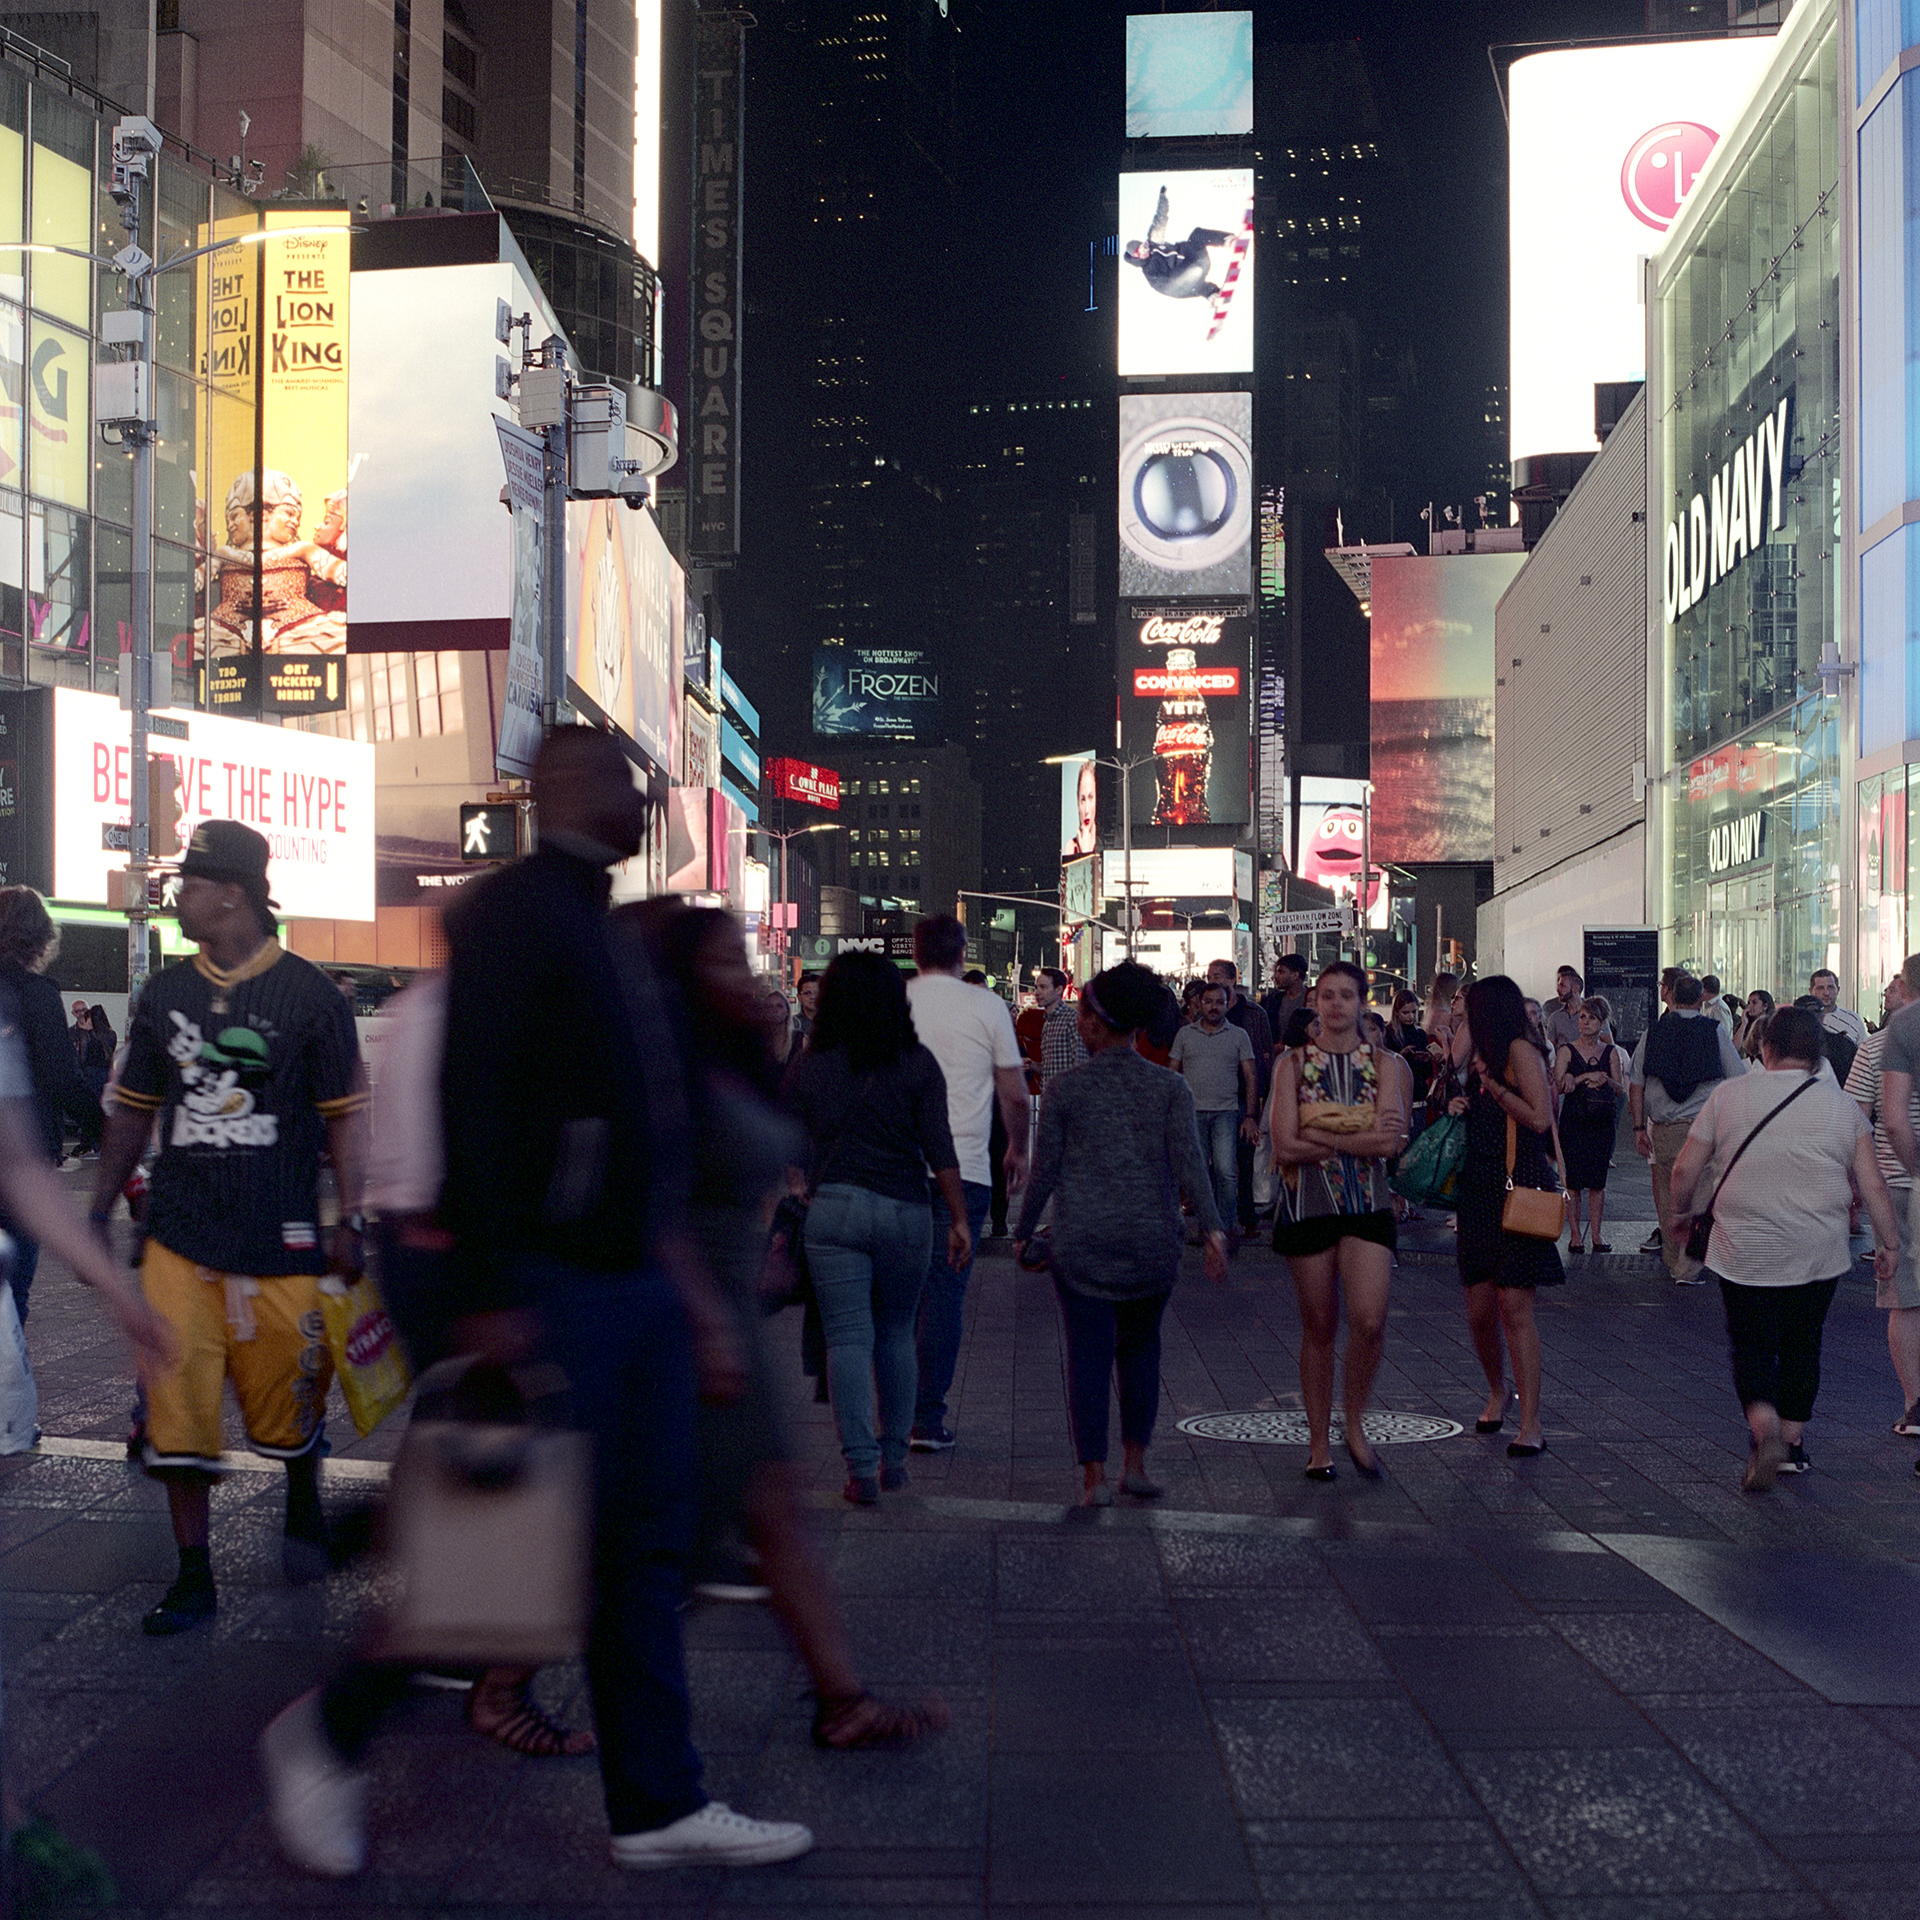 Crowds of people roam to and from places in Times Square at night